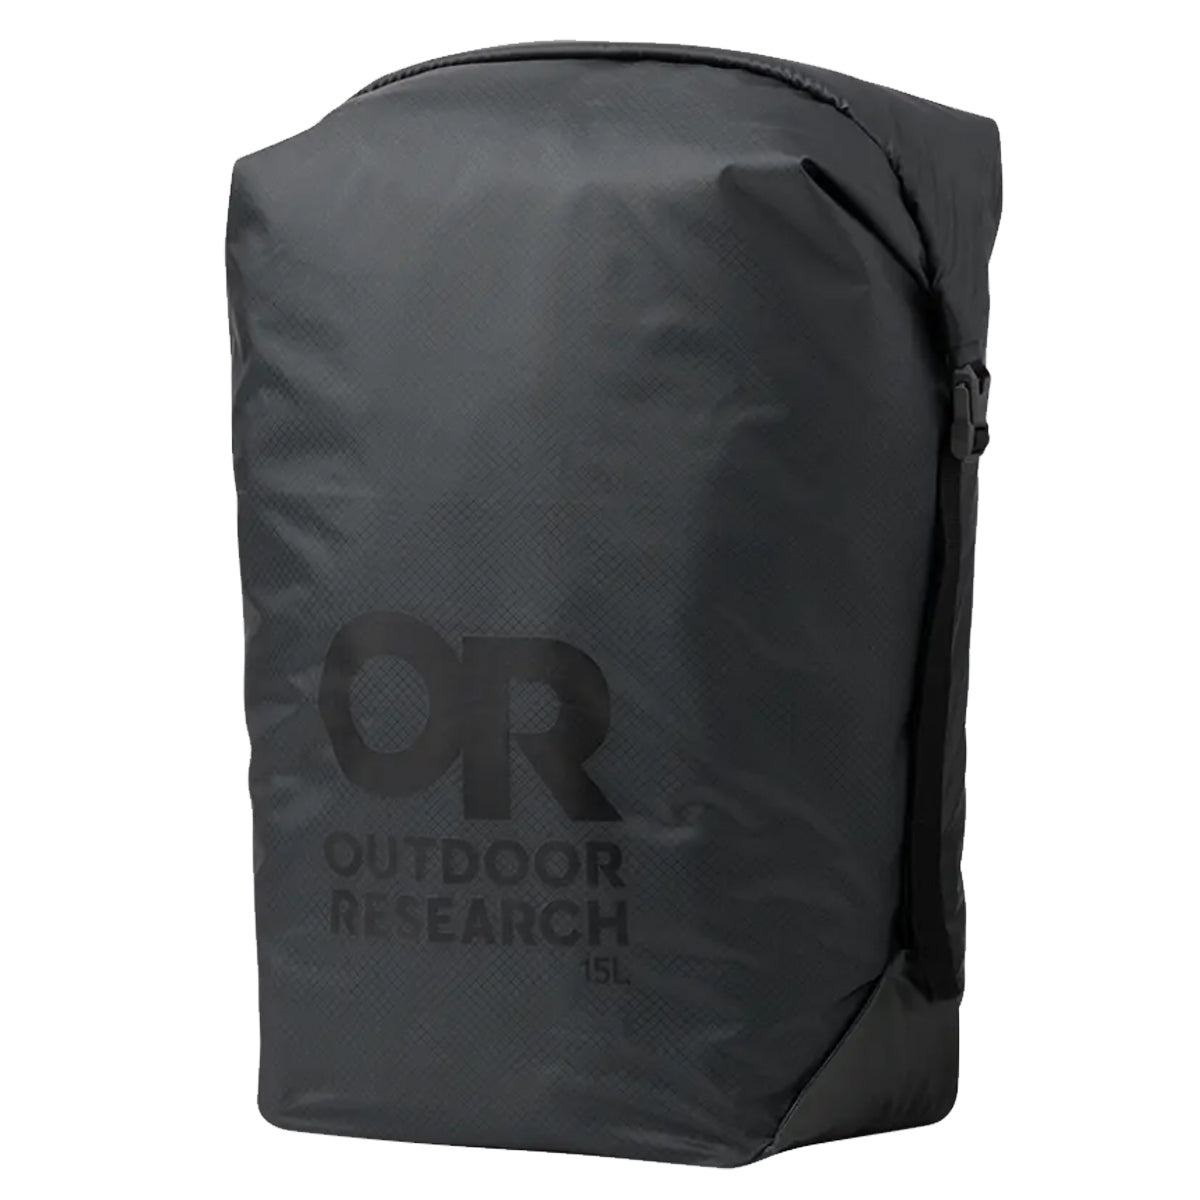 Outdoor Research PackOut Compression Sack in  by GOHUNT | Outdoor Research - GOHUNT Shop